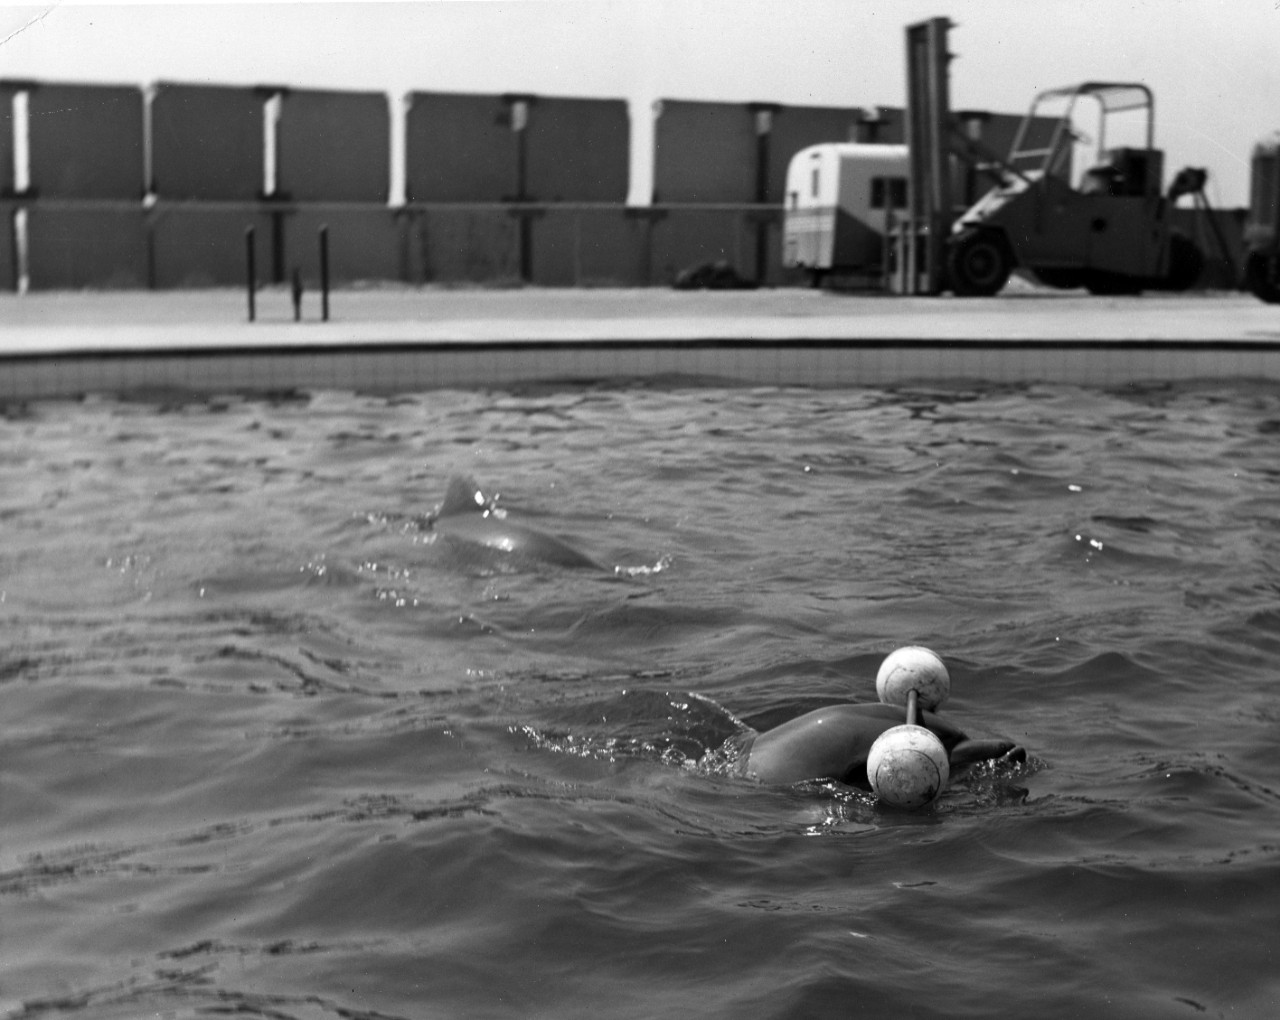 "Dash", Point Mugu porpoise, pushing a dumbbell with his head. August 20, 1963. 